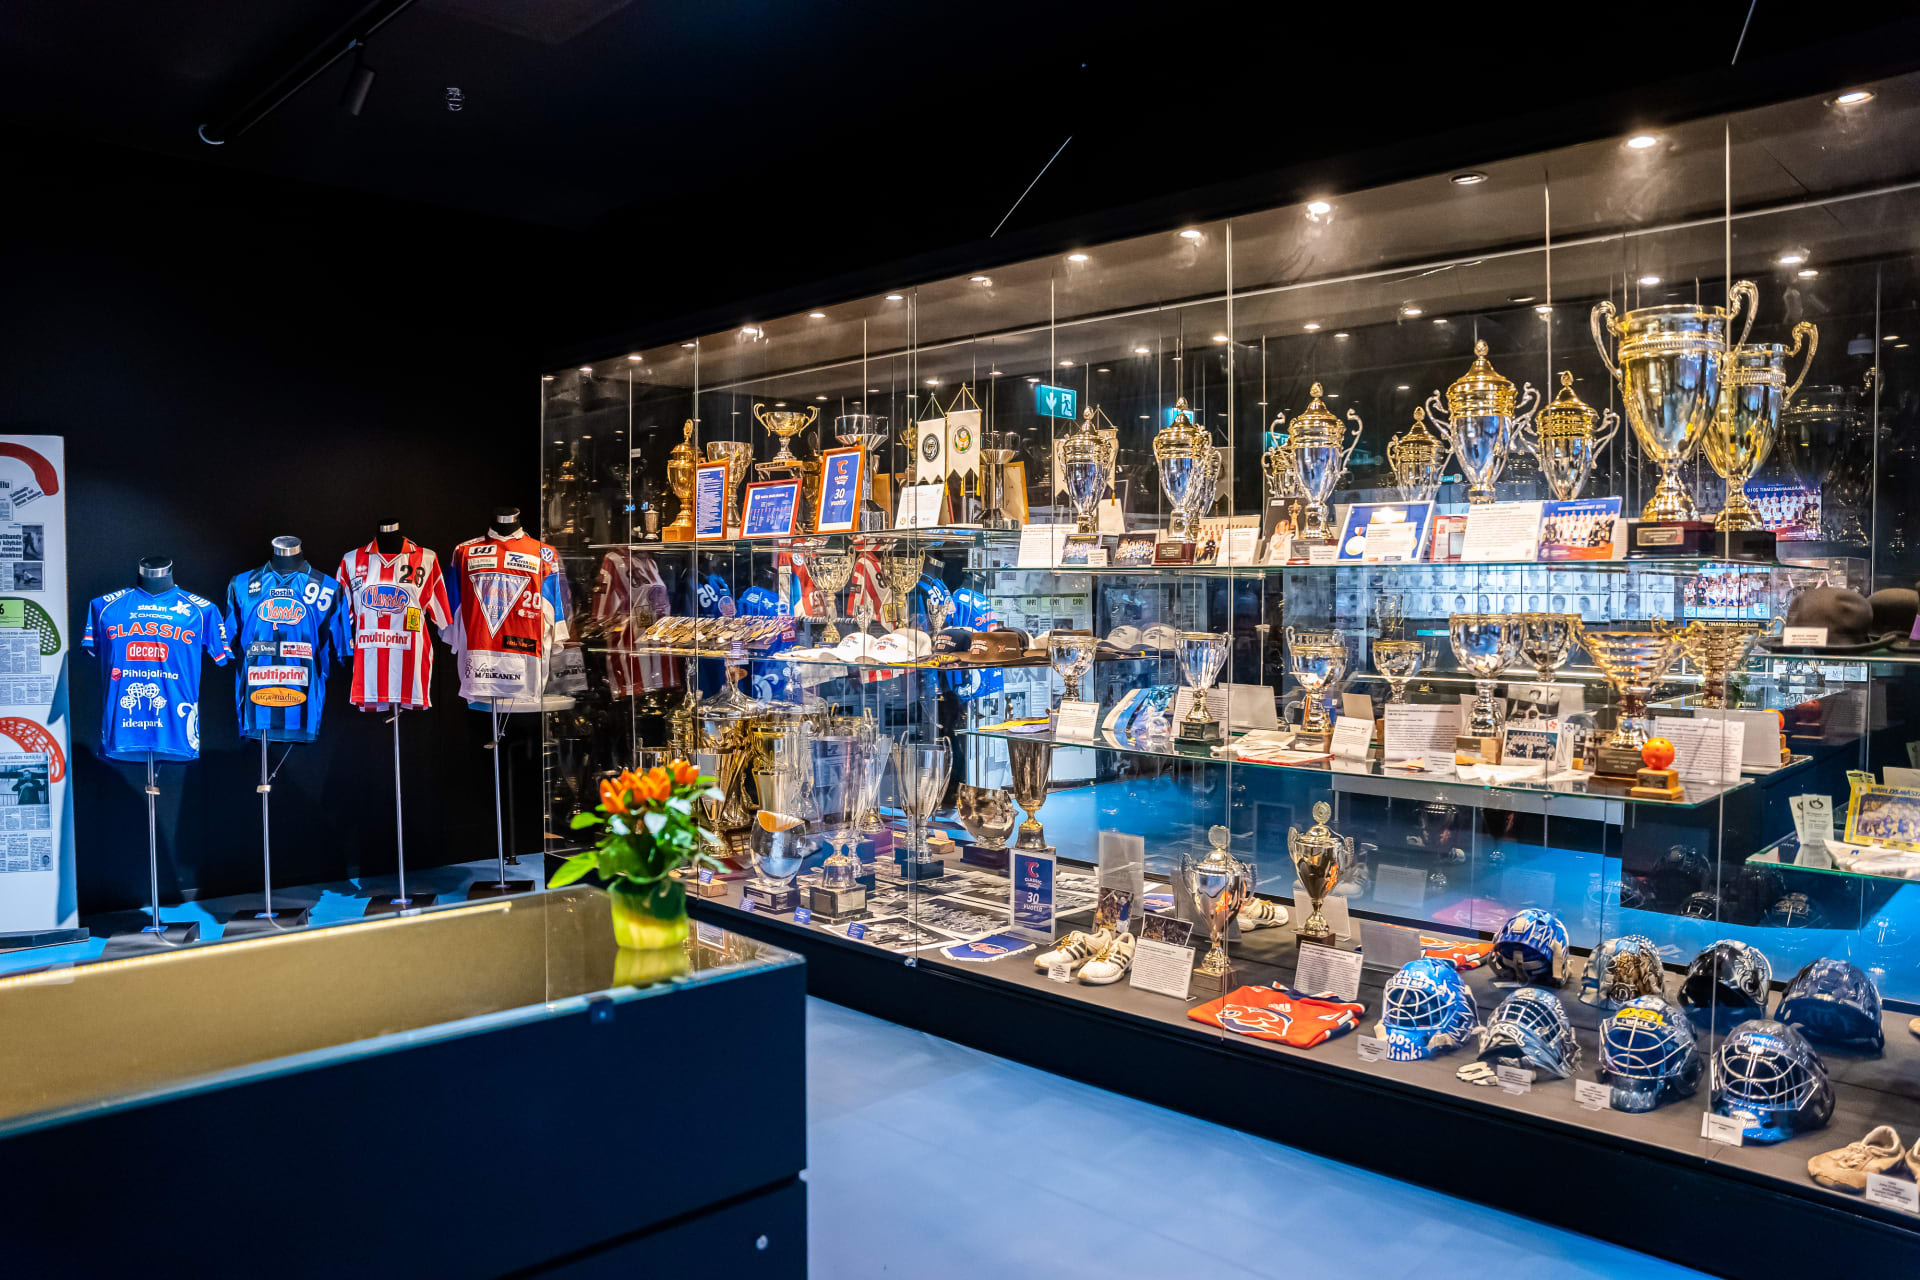 There is a lot of floorball material in Floorball Museum.